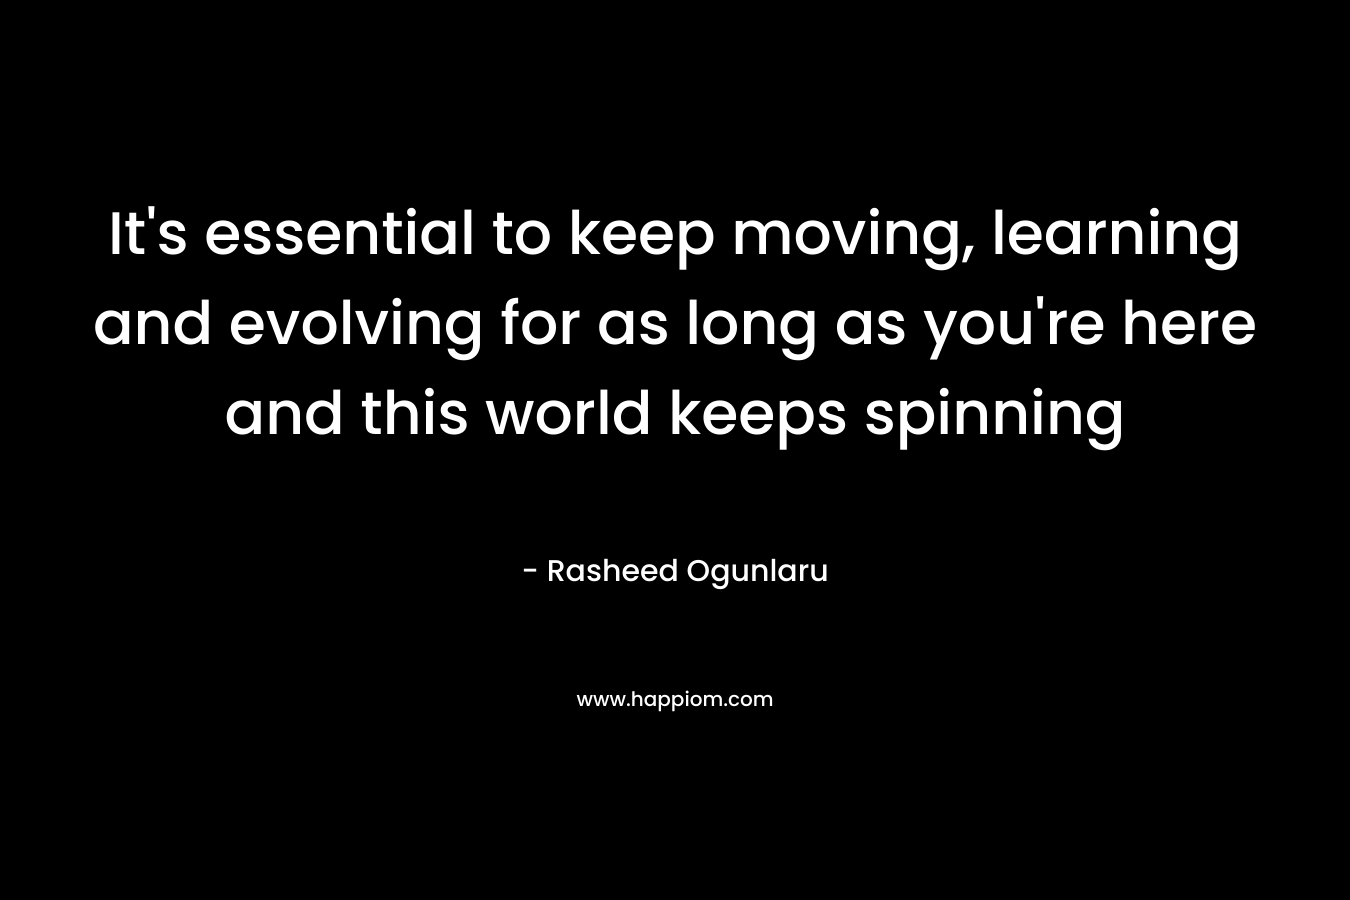 It's essential to keep moving, learning and evolving for as long as you're here and this world keeps spinning